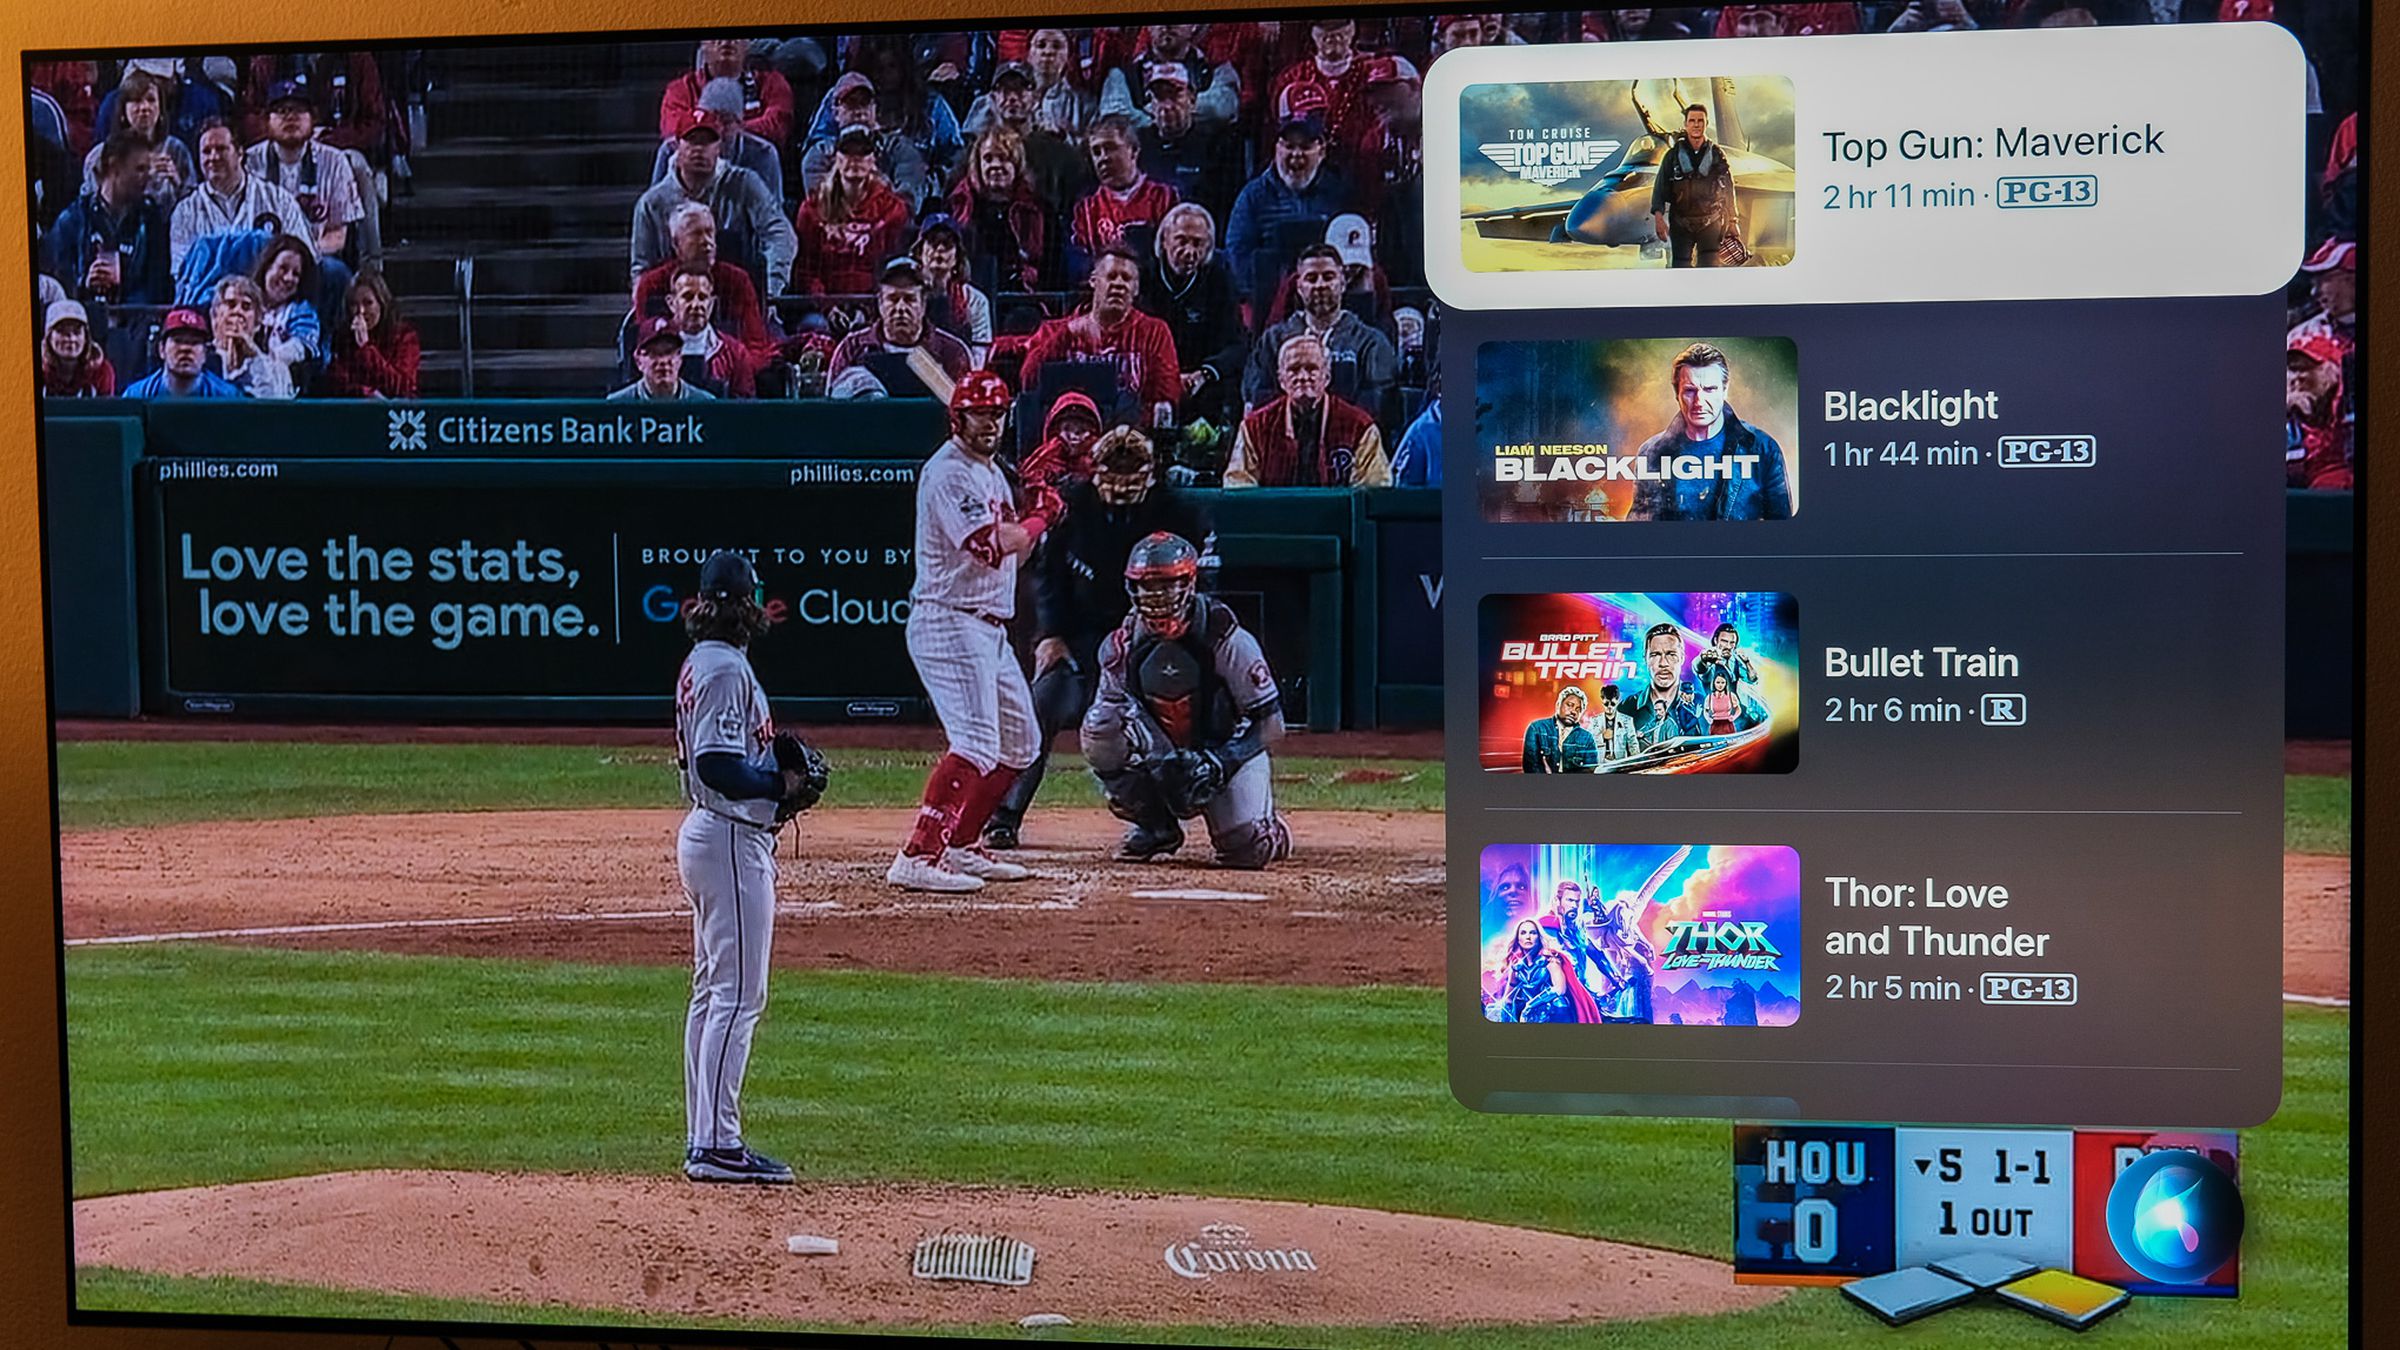 A photo of Siri showing movie results over a World Series game.